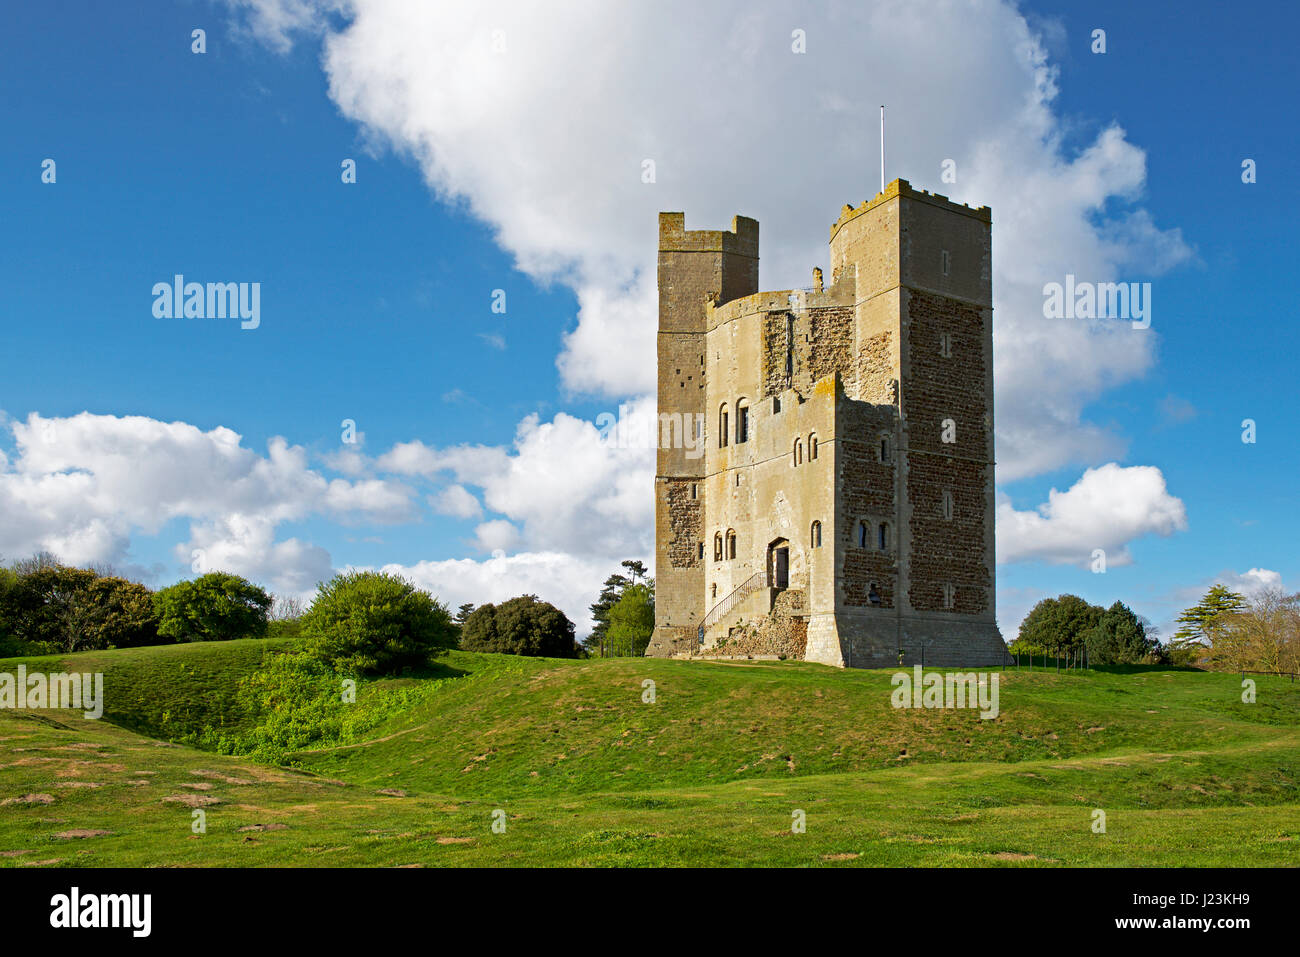 Orford Castle, Orford, Suffolk, England UK Stock Photo